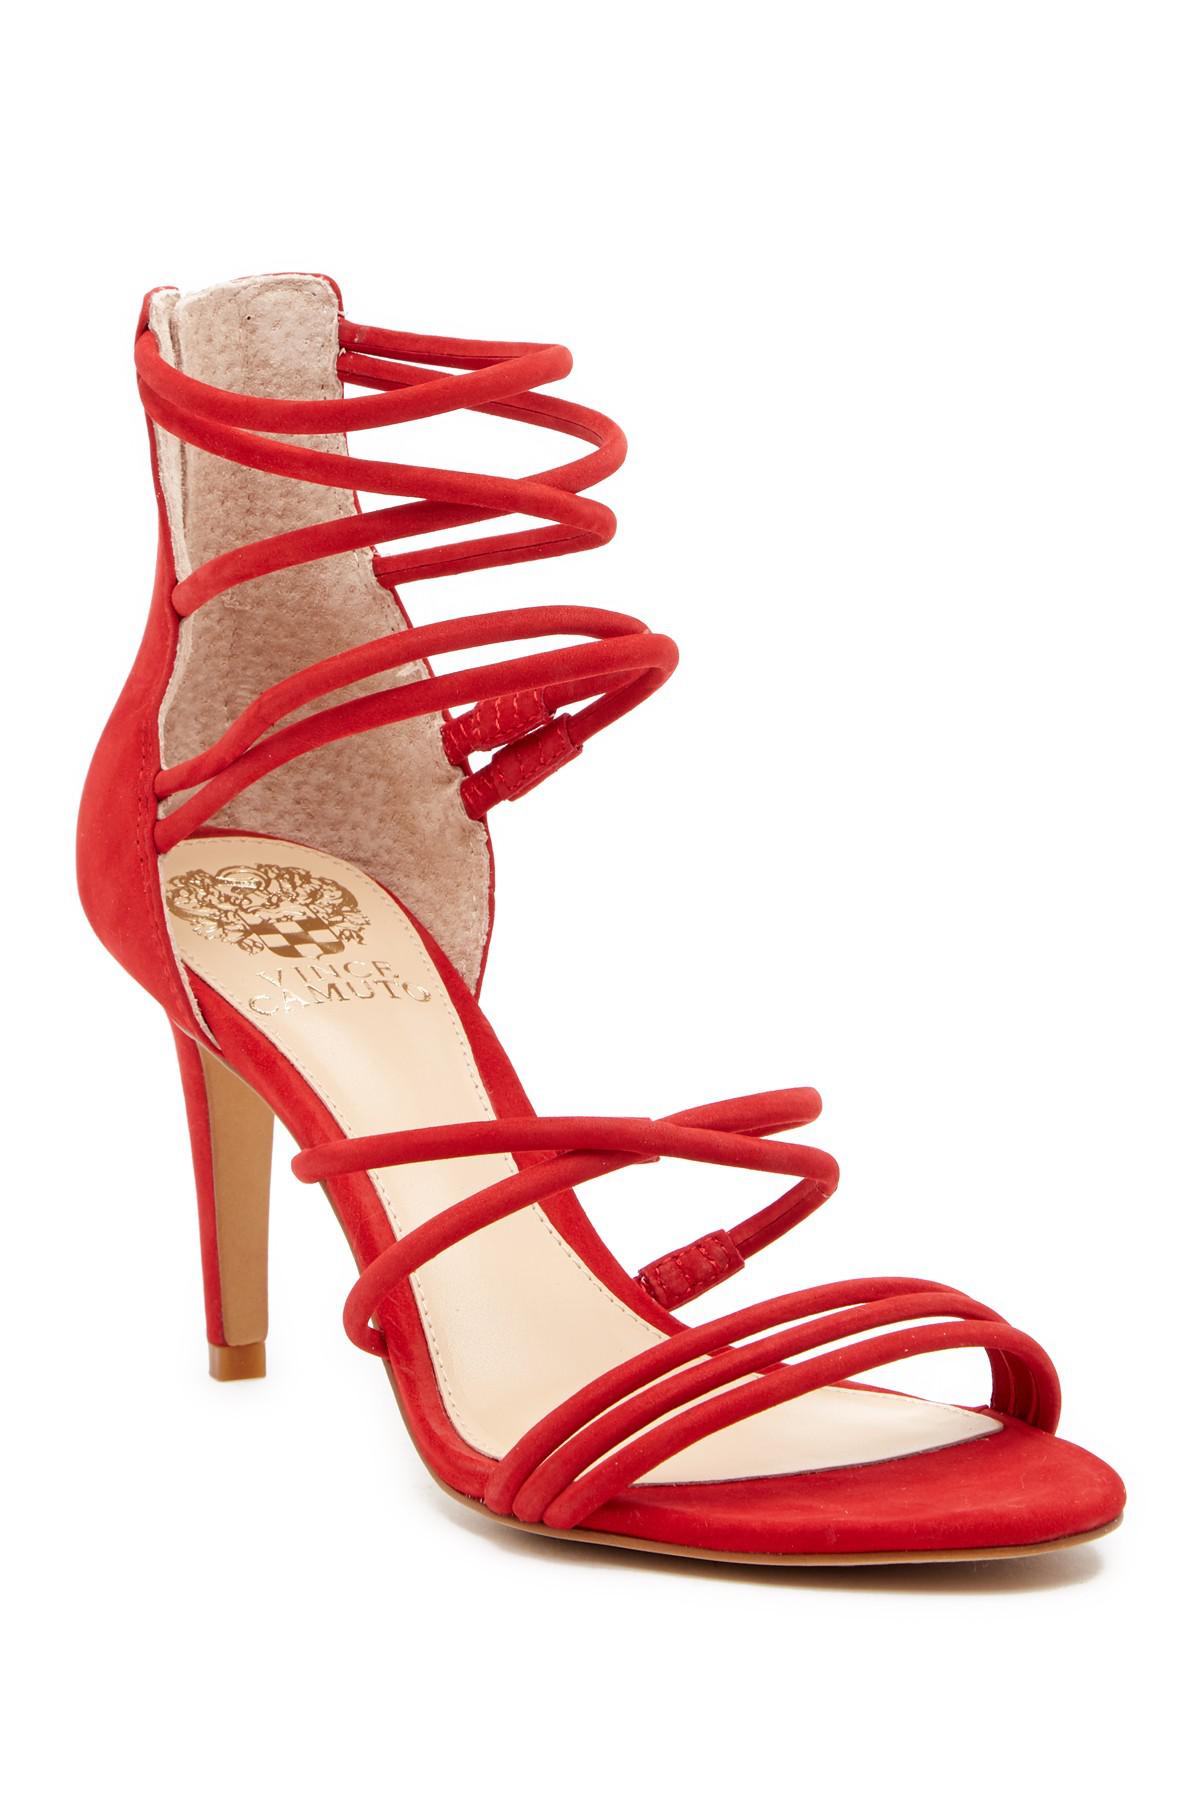 Vince Camuto Cadella Strappy Sandal in Red | Lyst